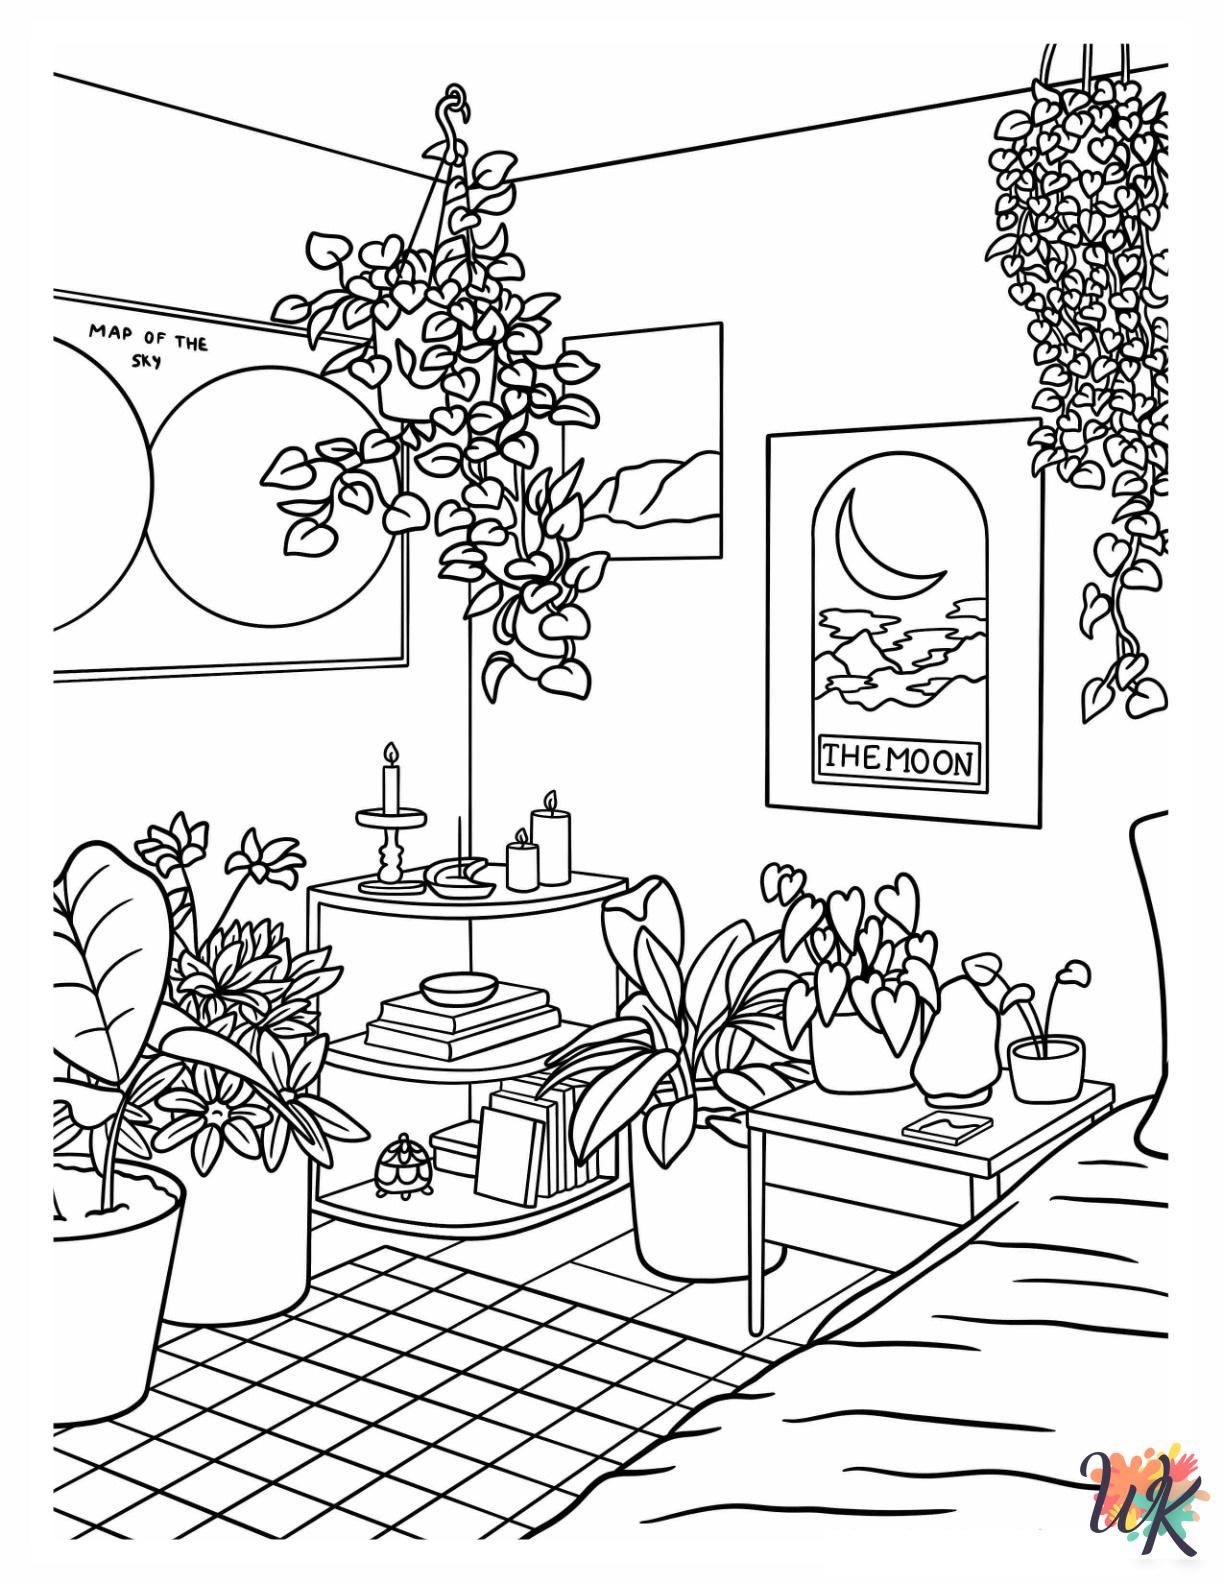 Aesthetic coloring pages for adults easy